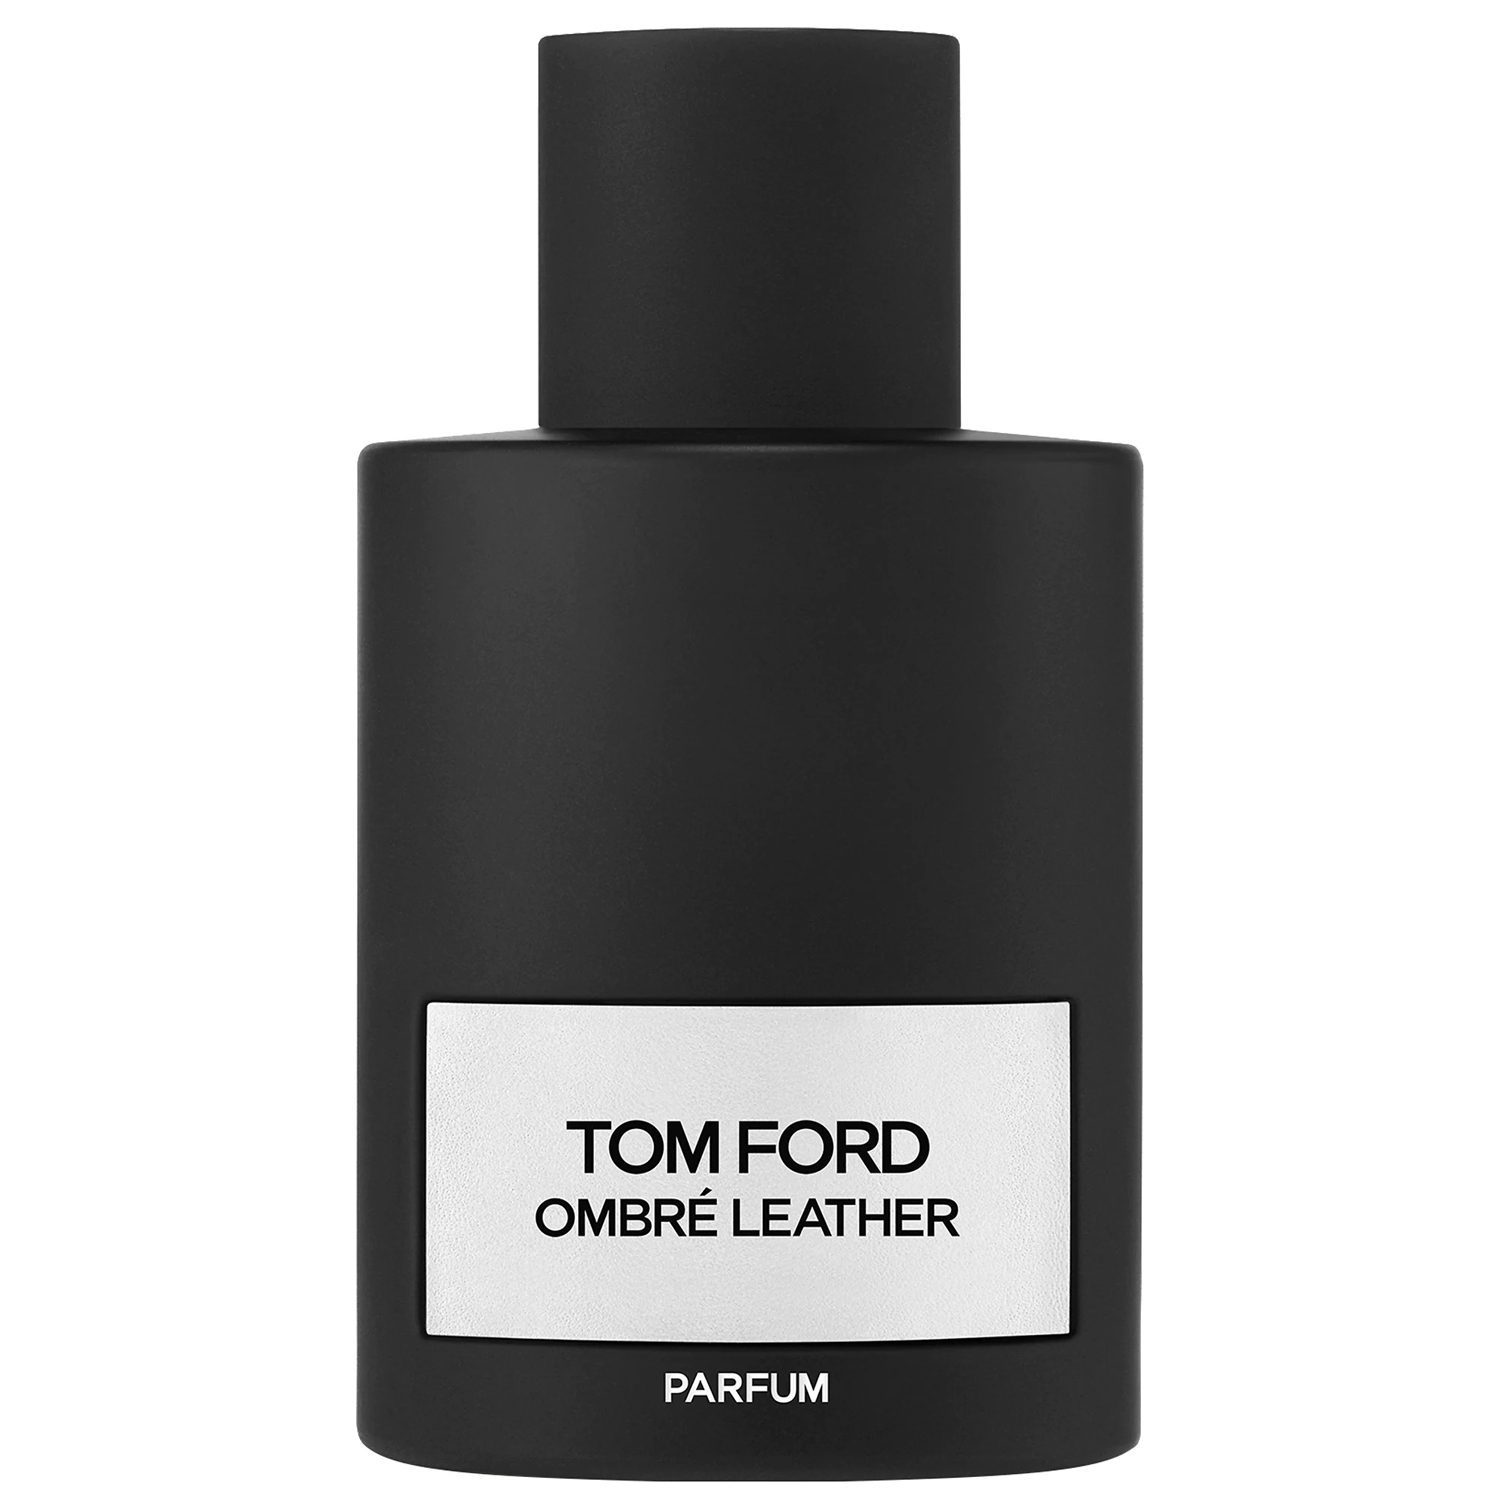 Tom Ford Ombre Leather Parfum Unisex - EDT EDP